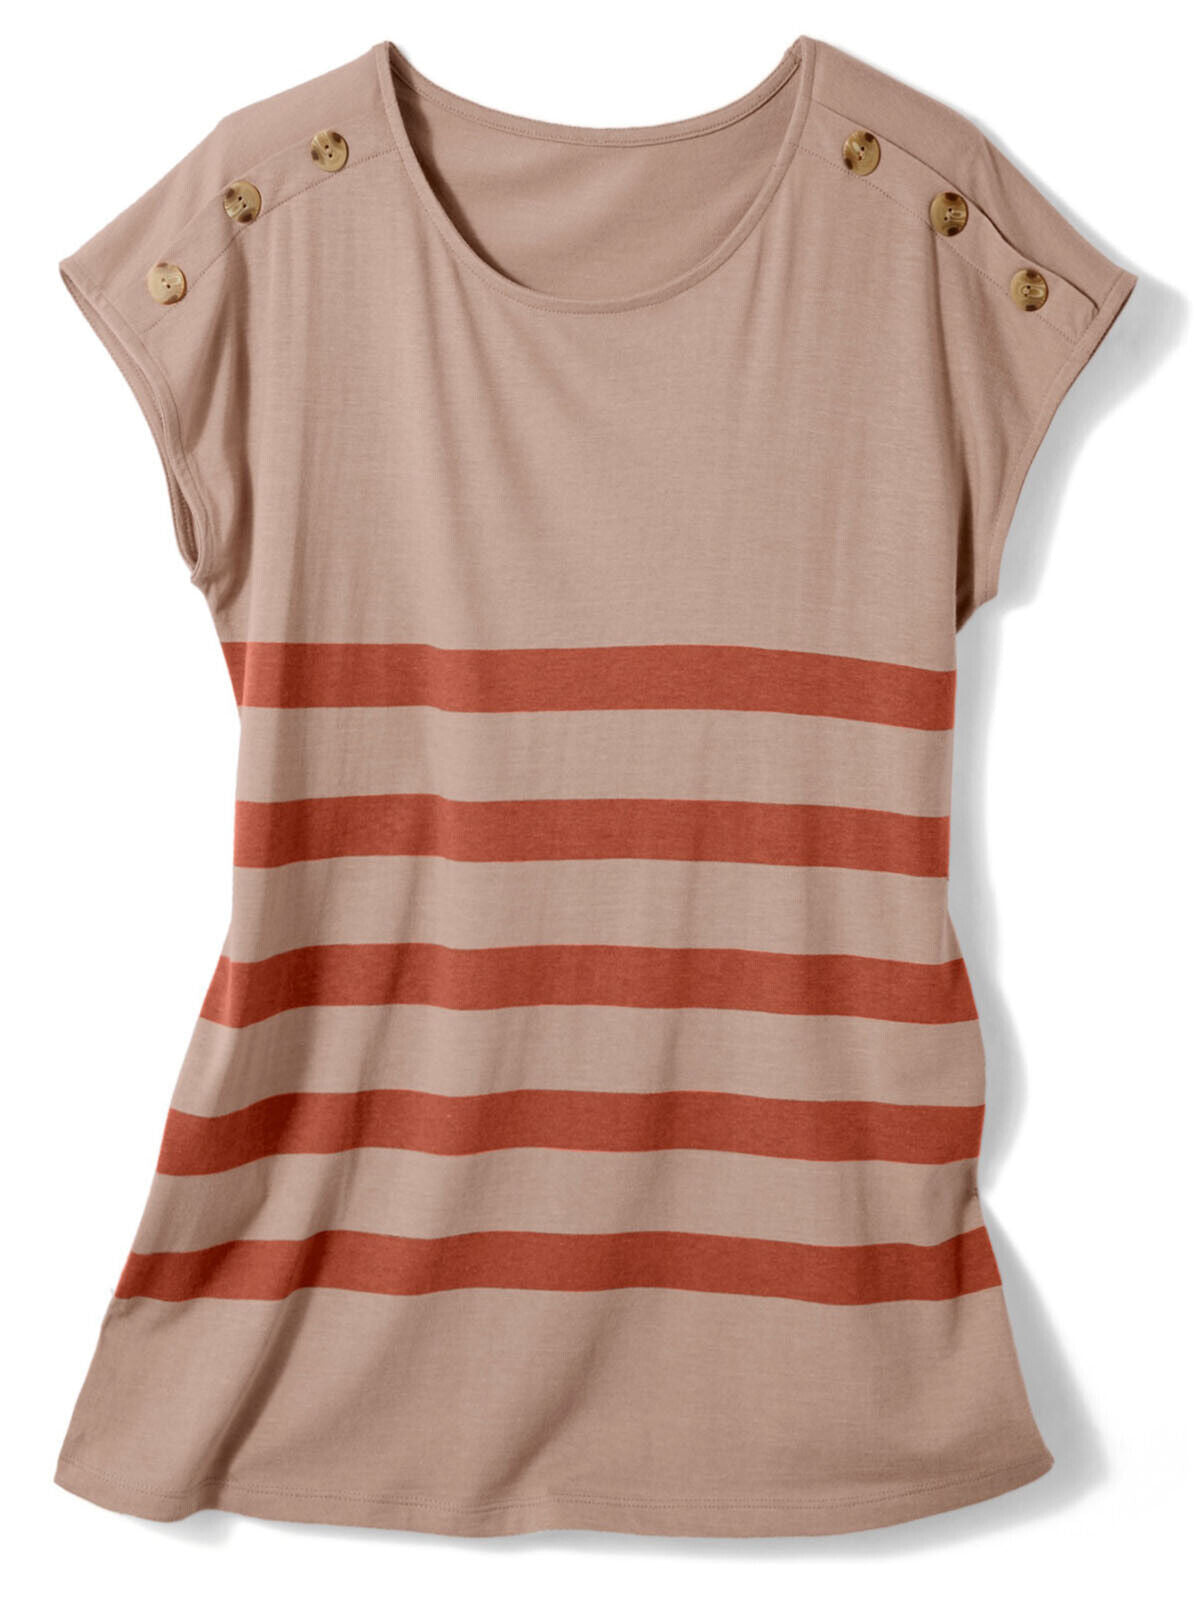 Blancheporte Taupe Striped Button Shoulder T-Shirt in Sizes 14/16, 18/20, 24, 26